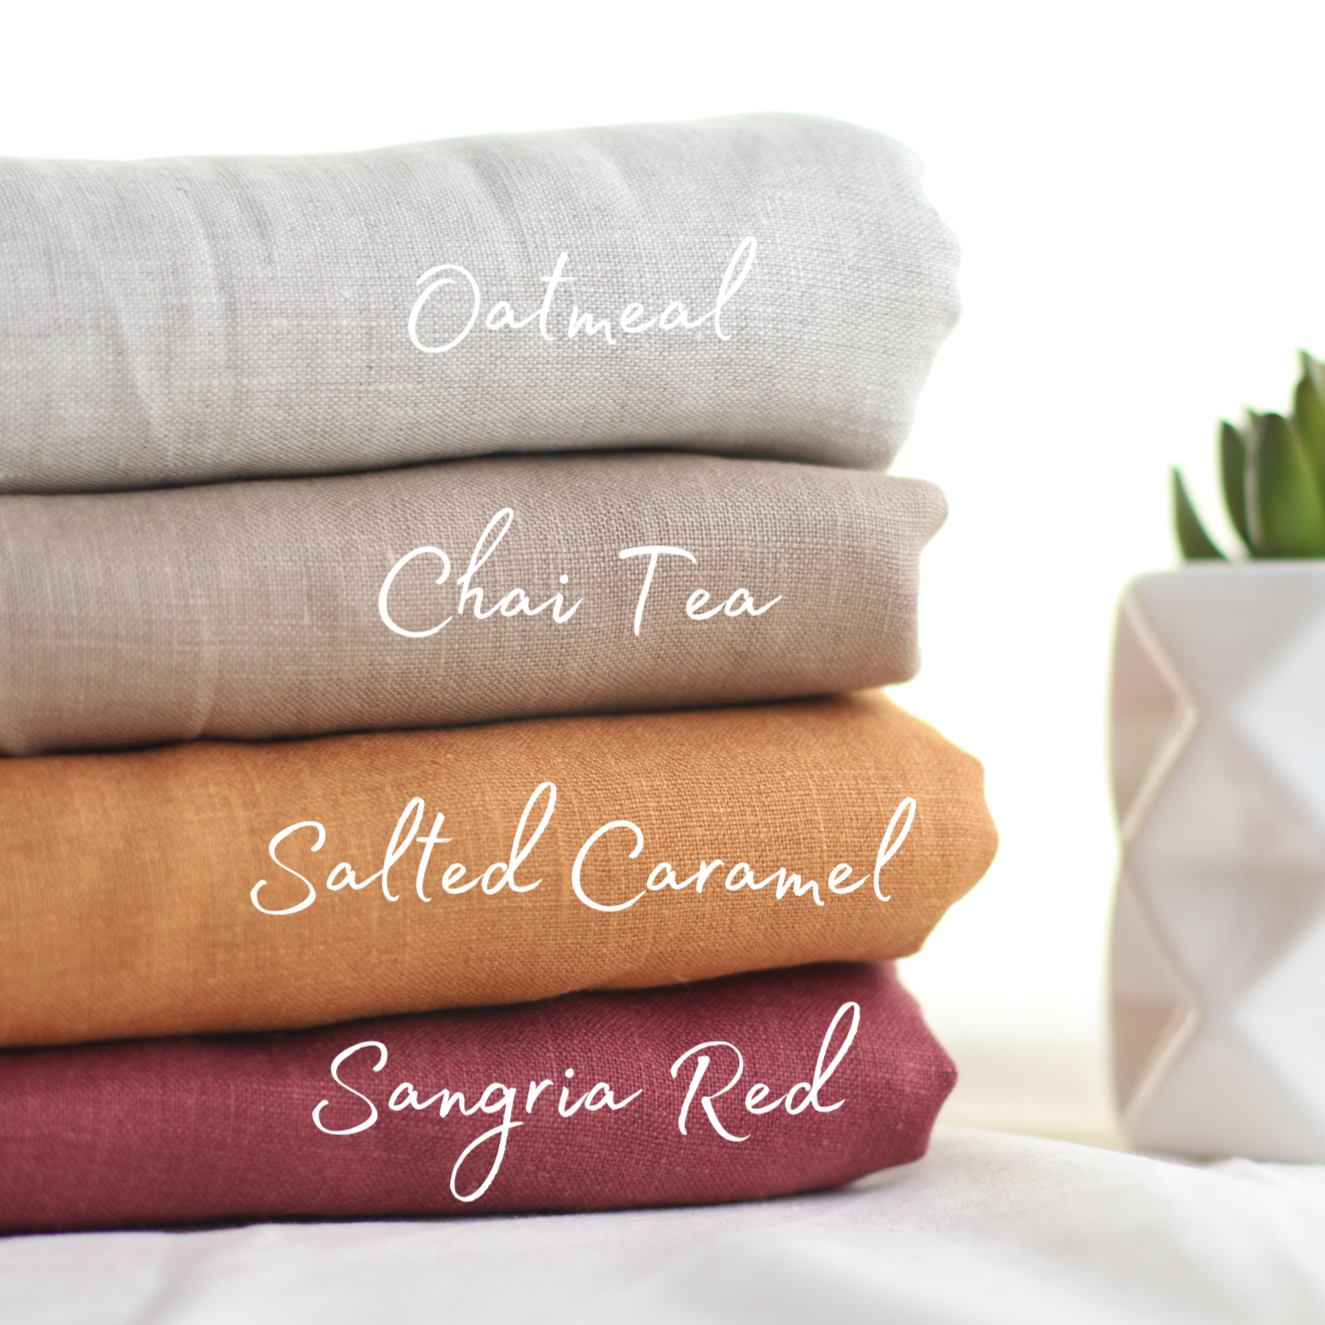 Stone Washed Pure Linen | Oatmeal